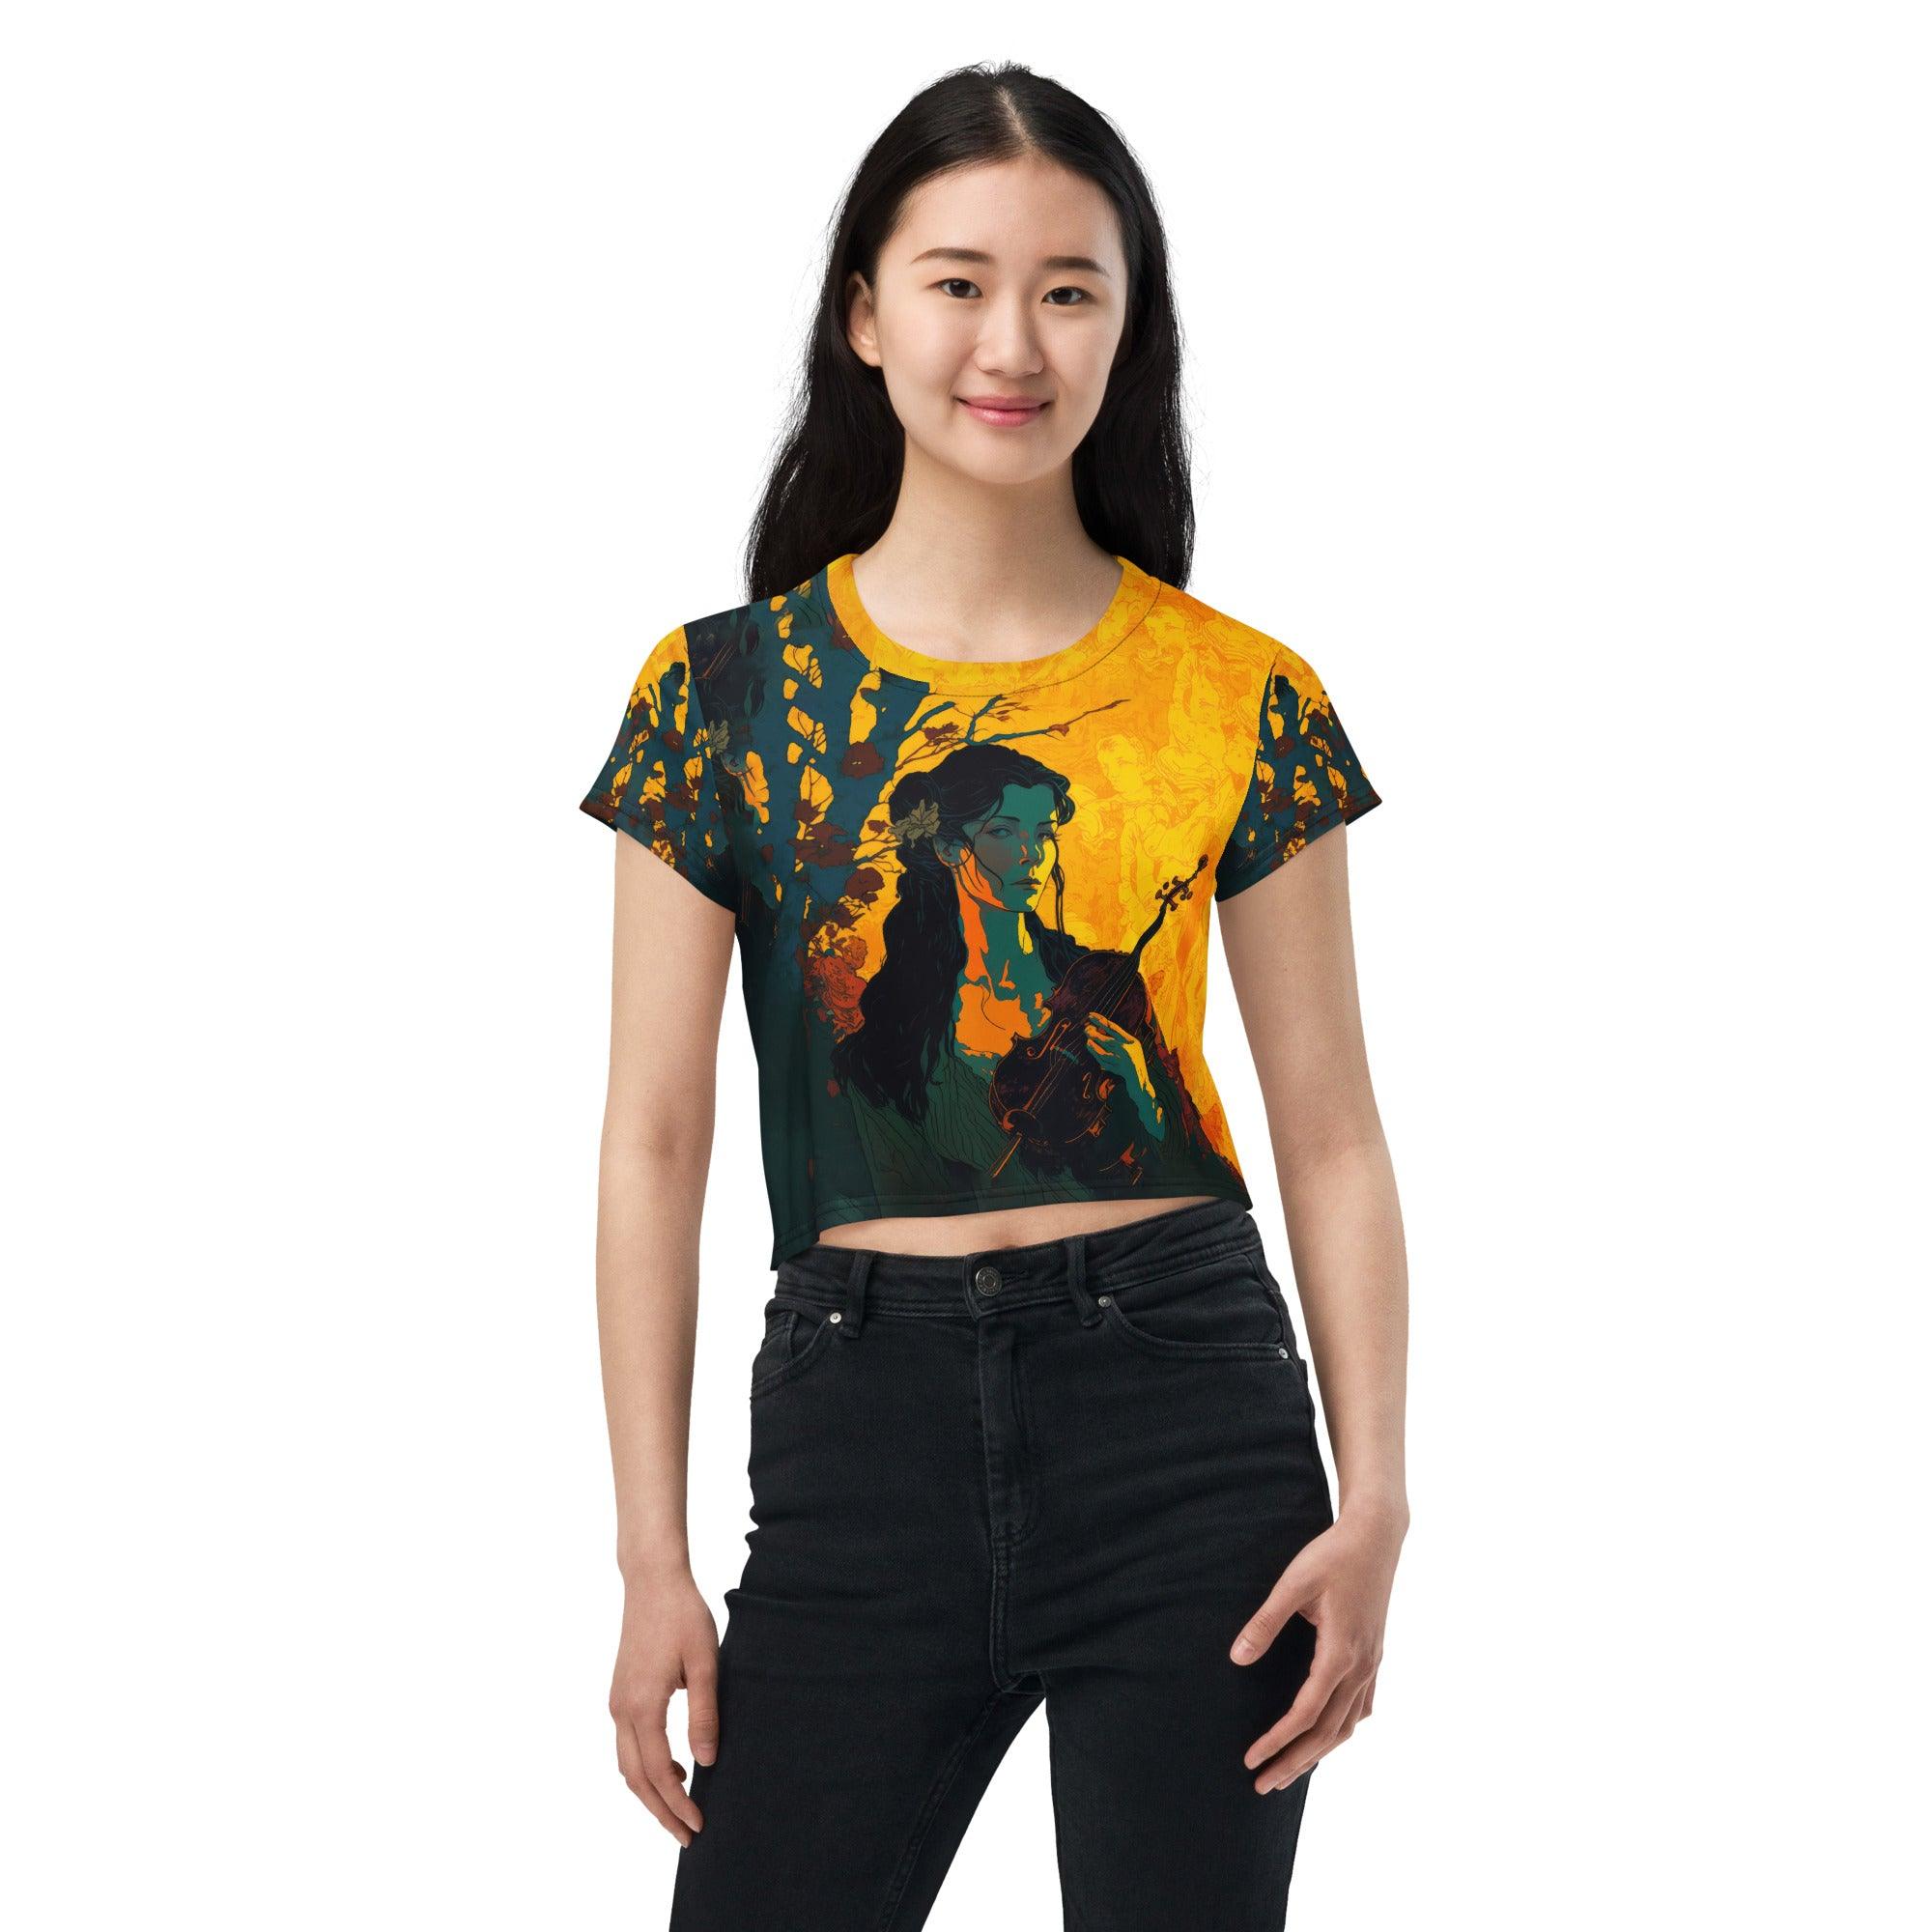 Woman wearing SurArt 78 stylish all-over print crop top.